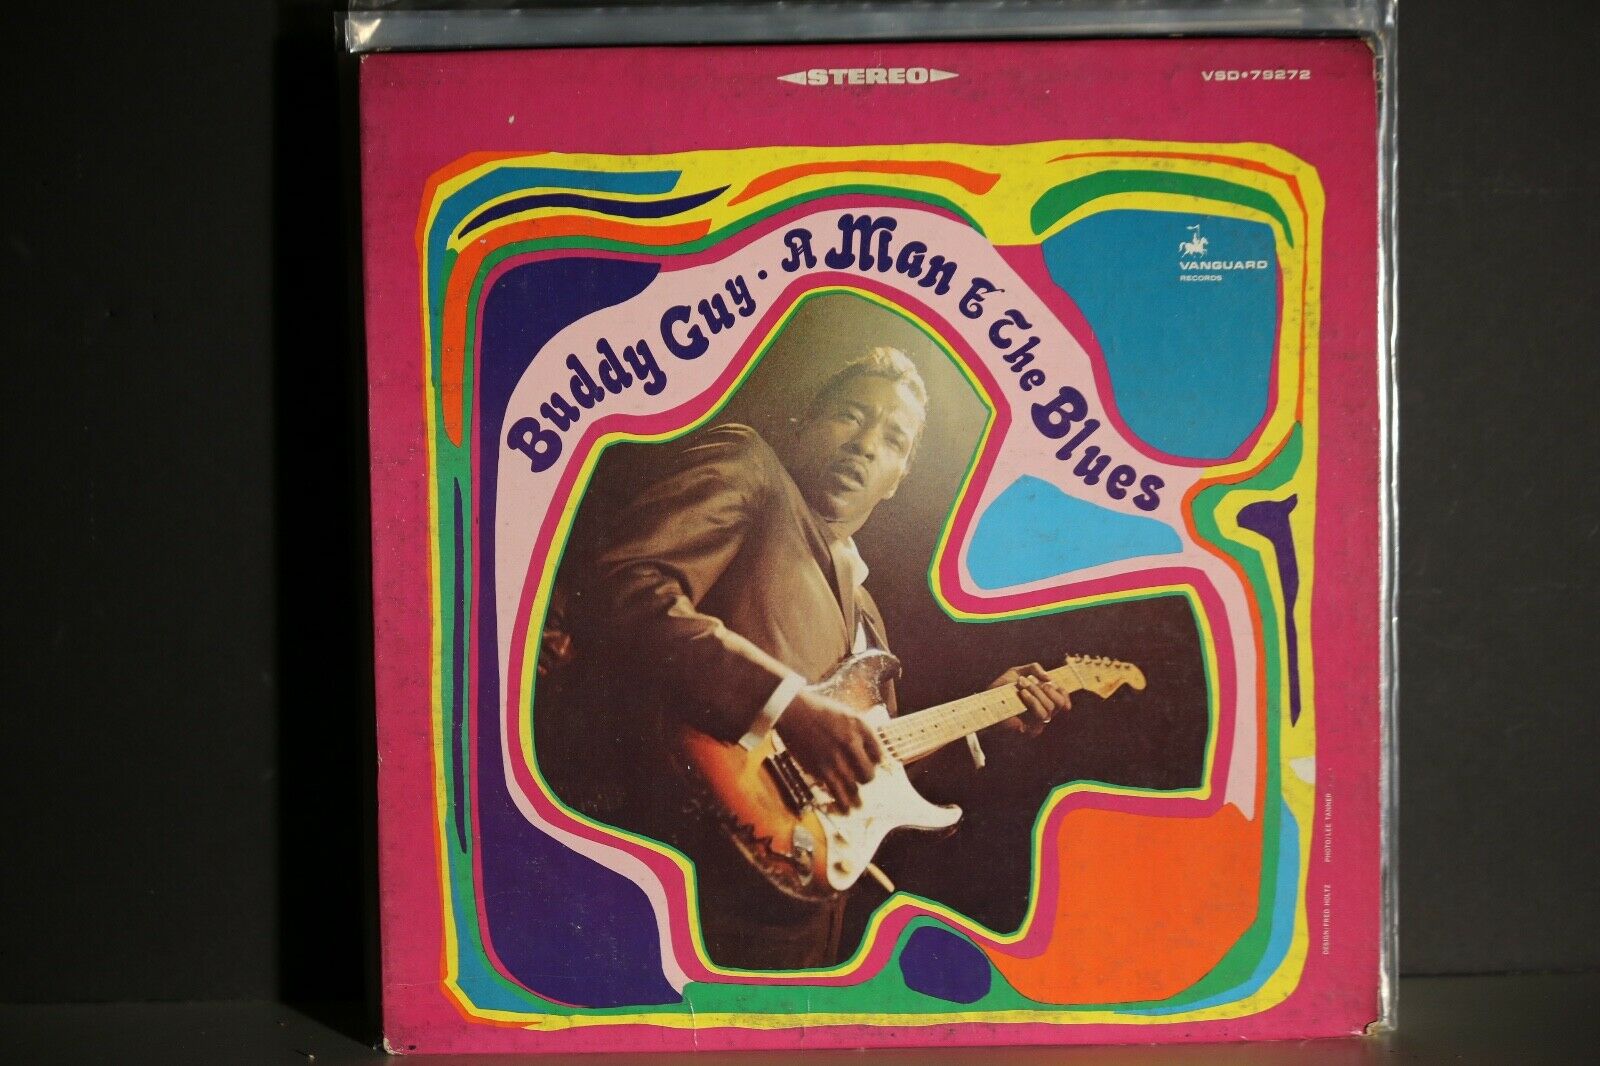 BUDDY GUY LP A MAN AND THE BLUES 1968 US STEREO PRESS VSD79272 GUITAR